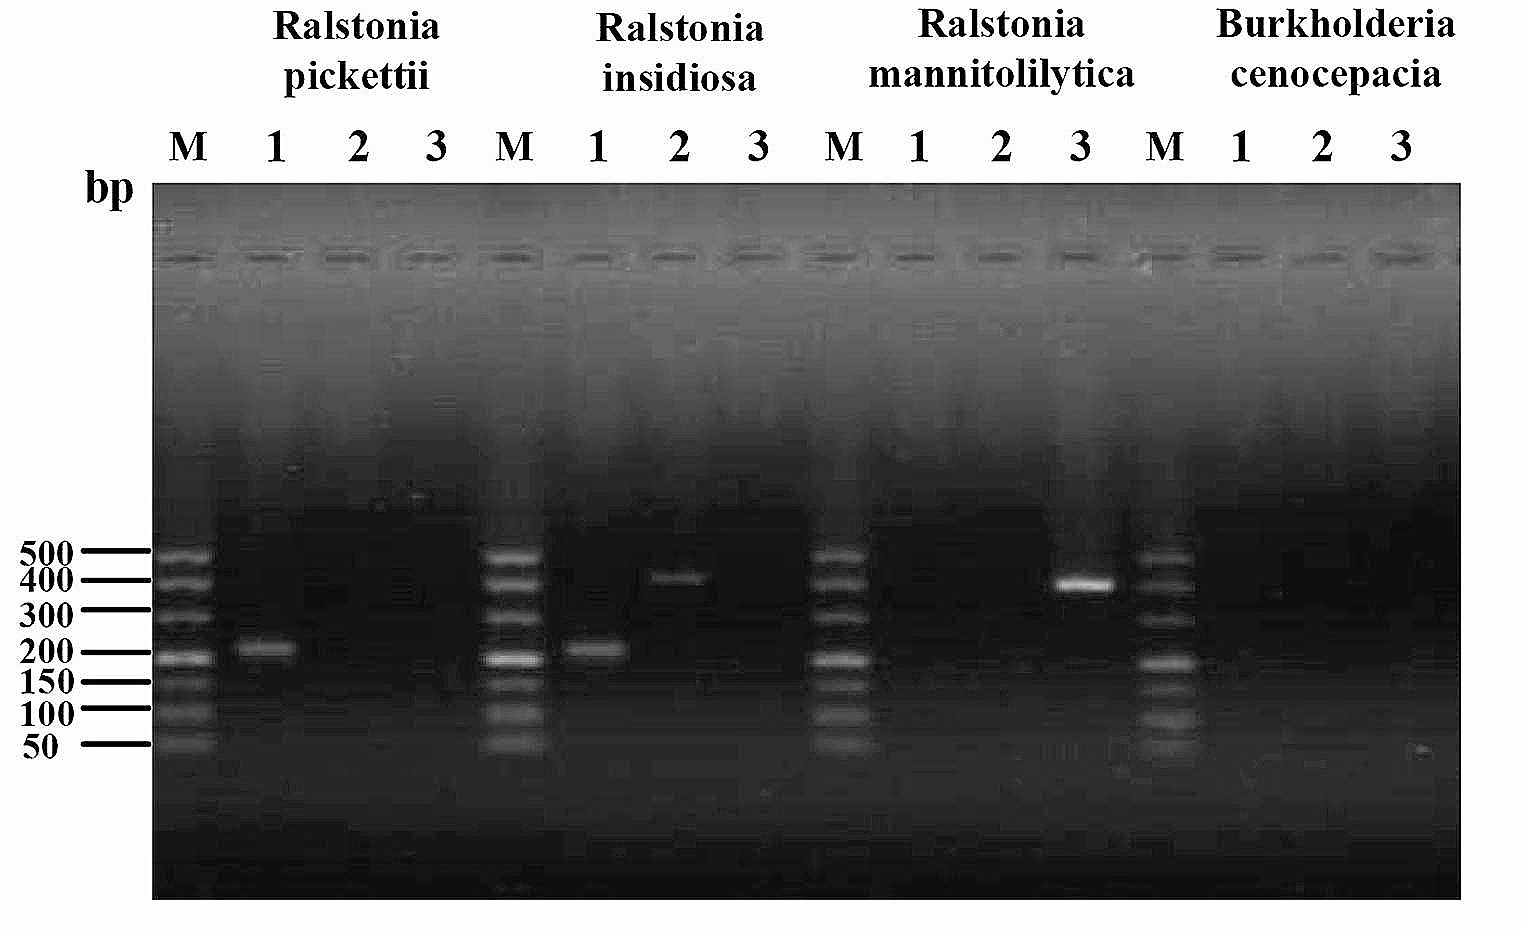 Molecular epidemiological and clinical infection characteristics analysis of Ralstonia